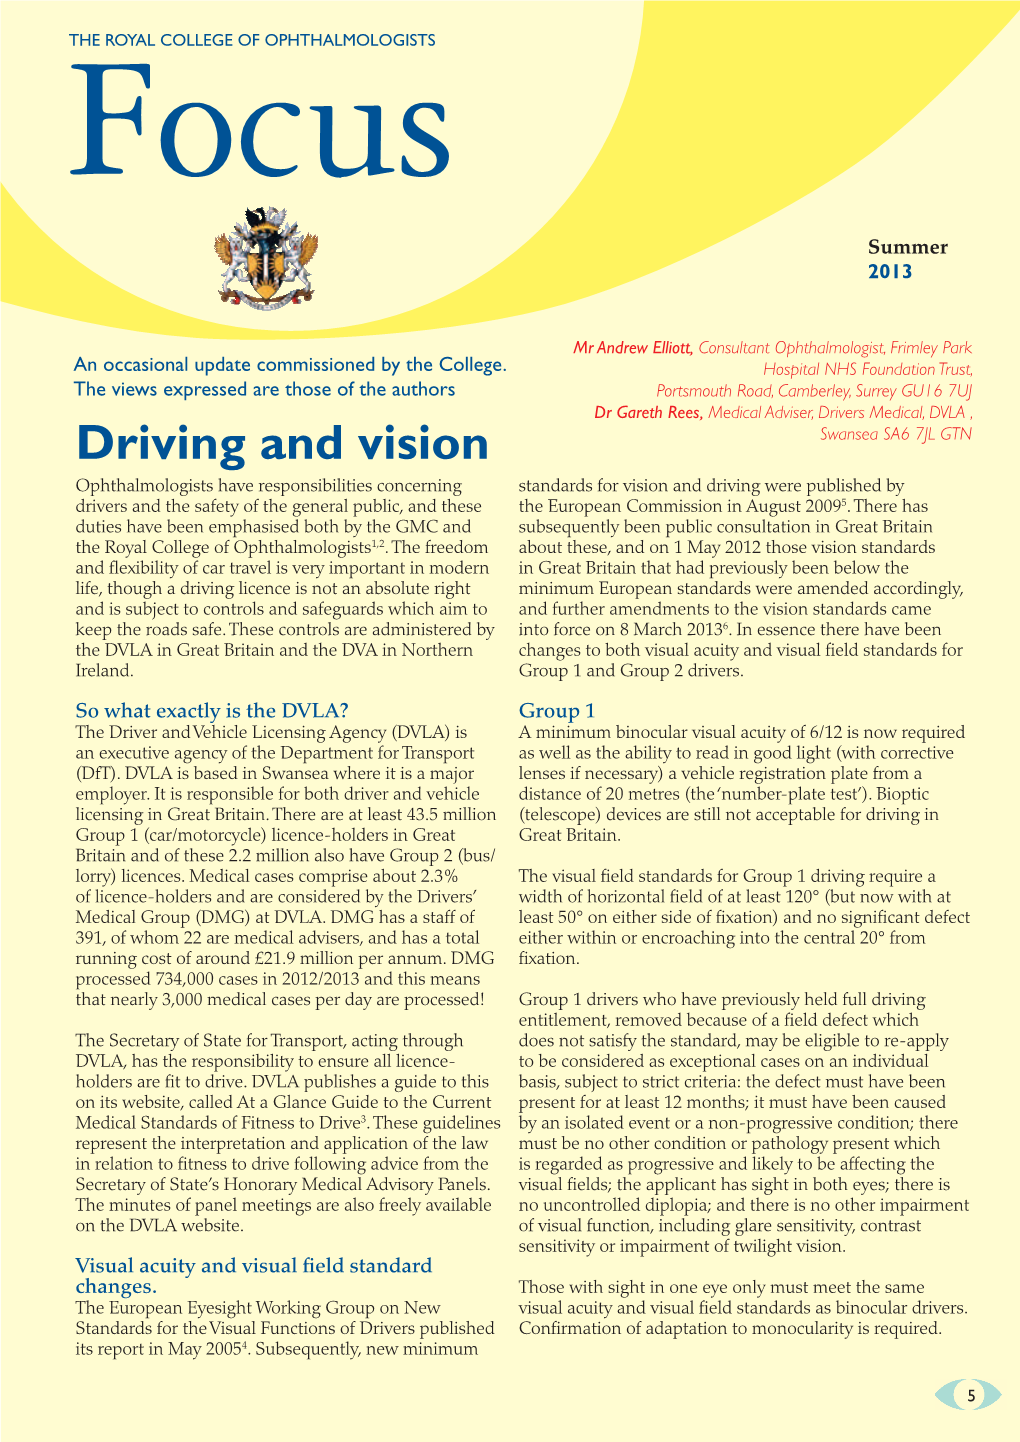 Driving and Vision